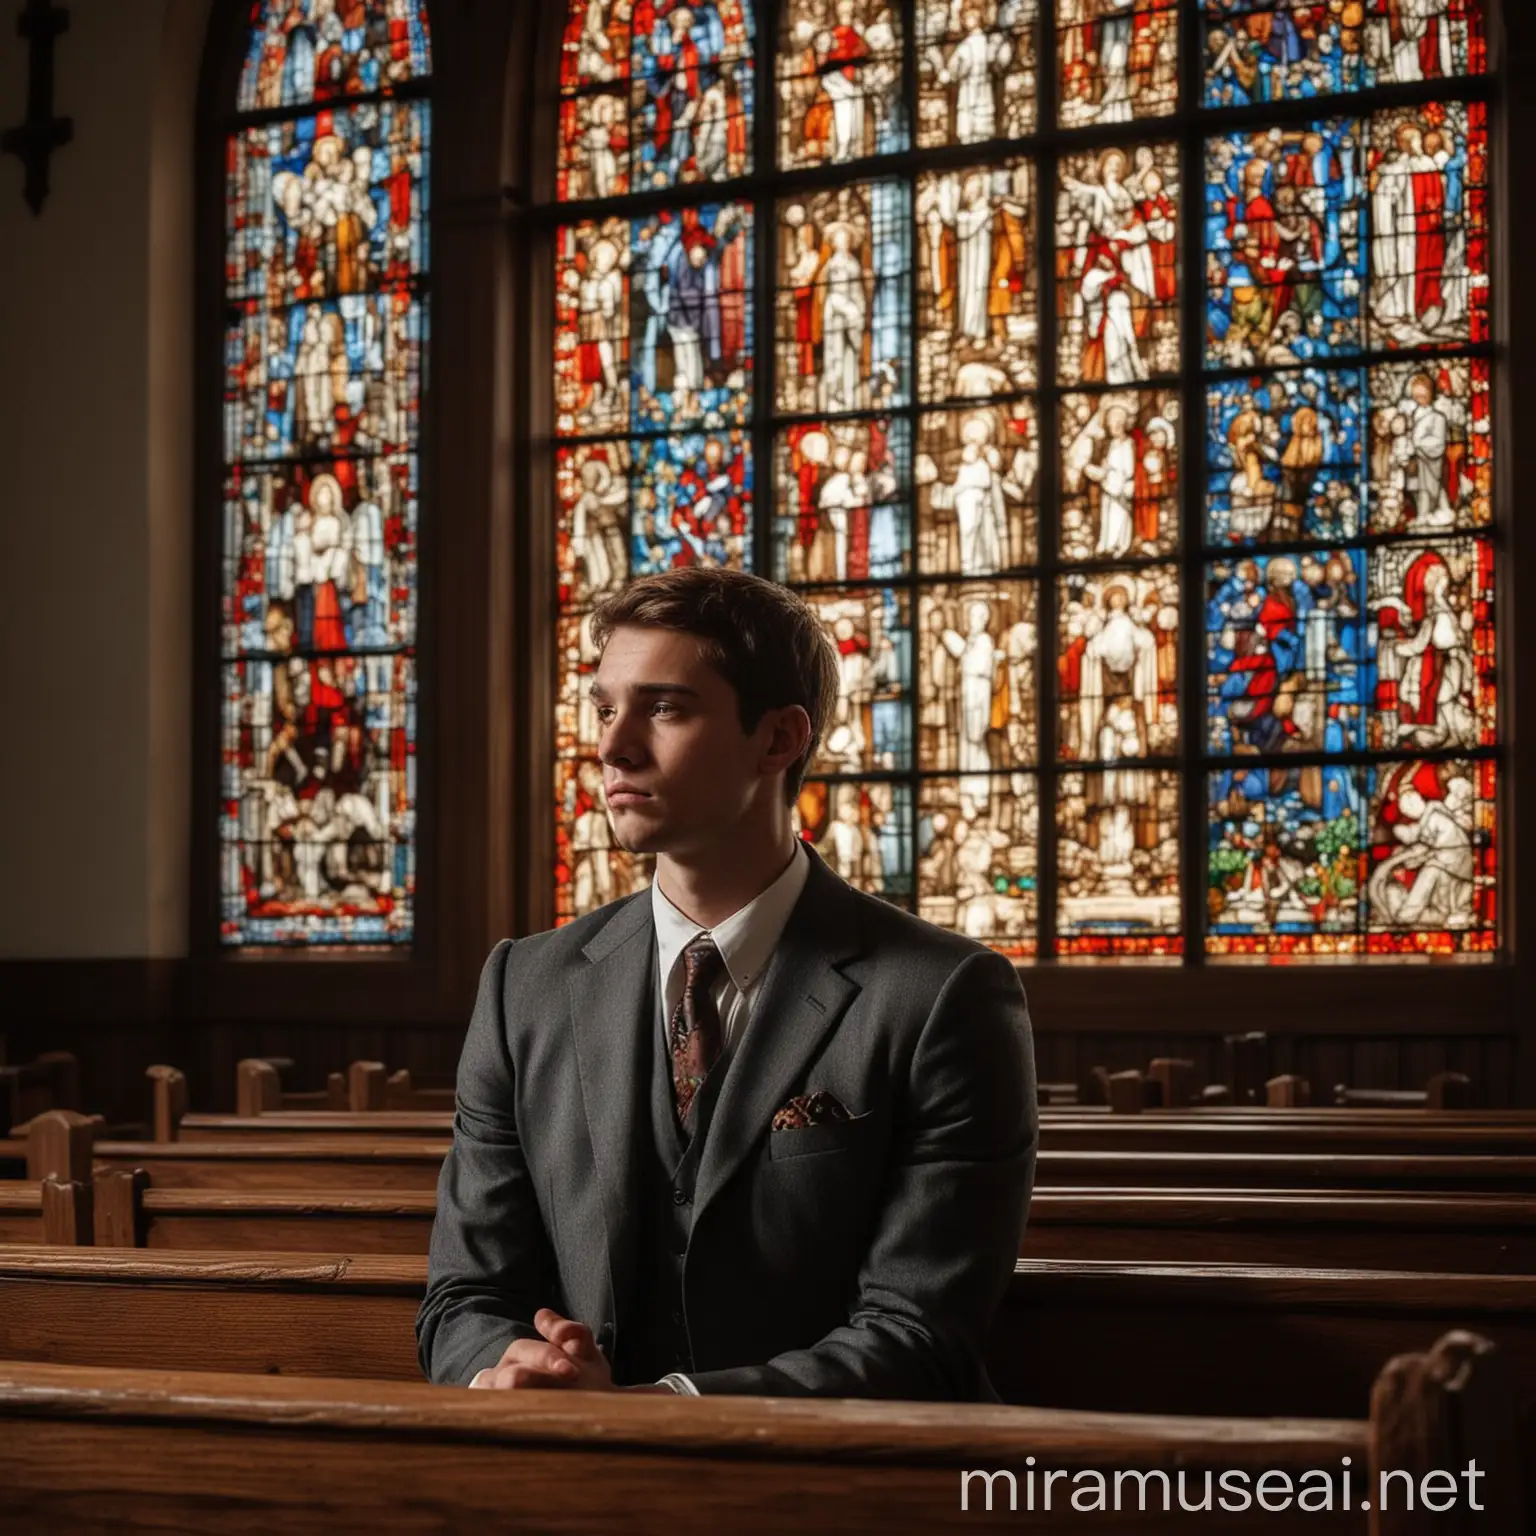 Weary Man in Church Contemplative Portrait with Stained Glass Light